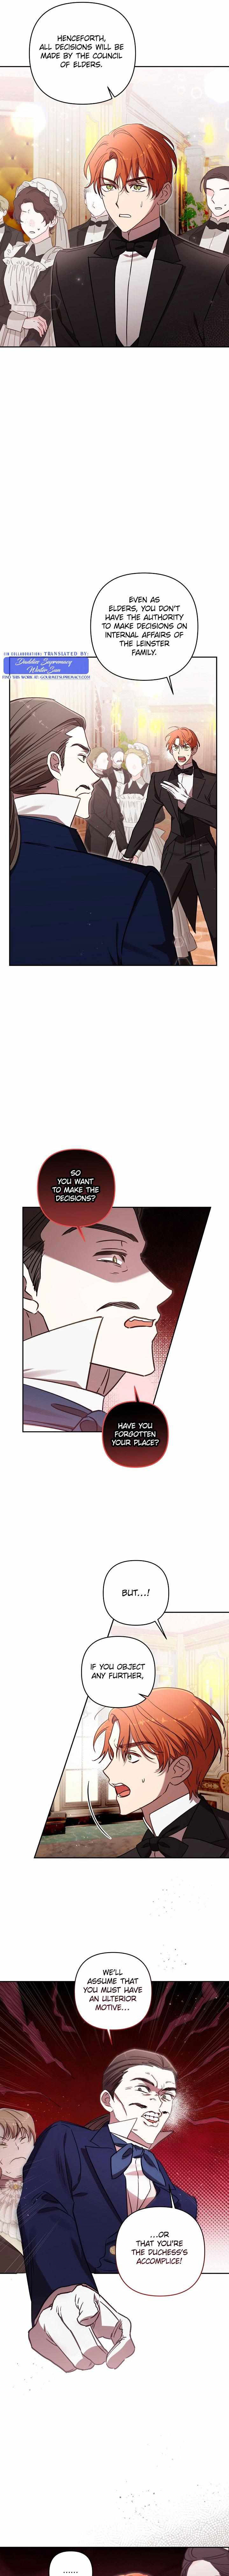 I am Afraid I have Failed to Divorce Chapter 80 page 4